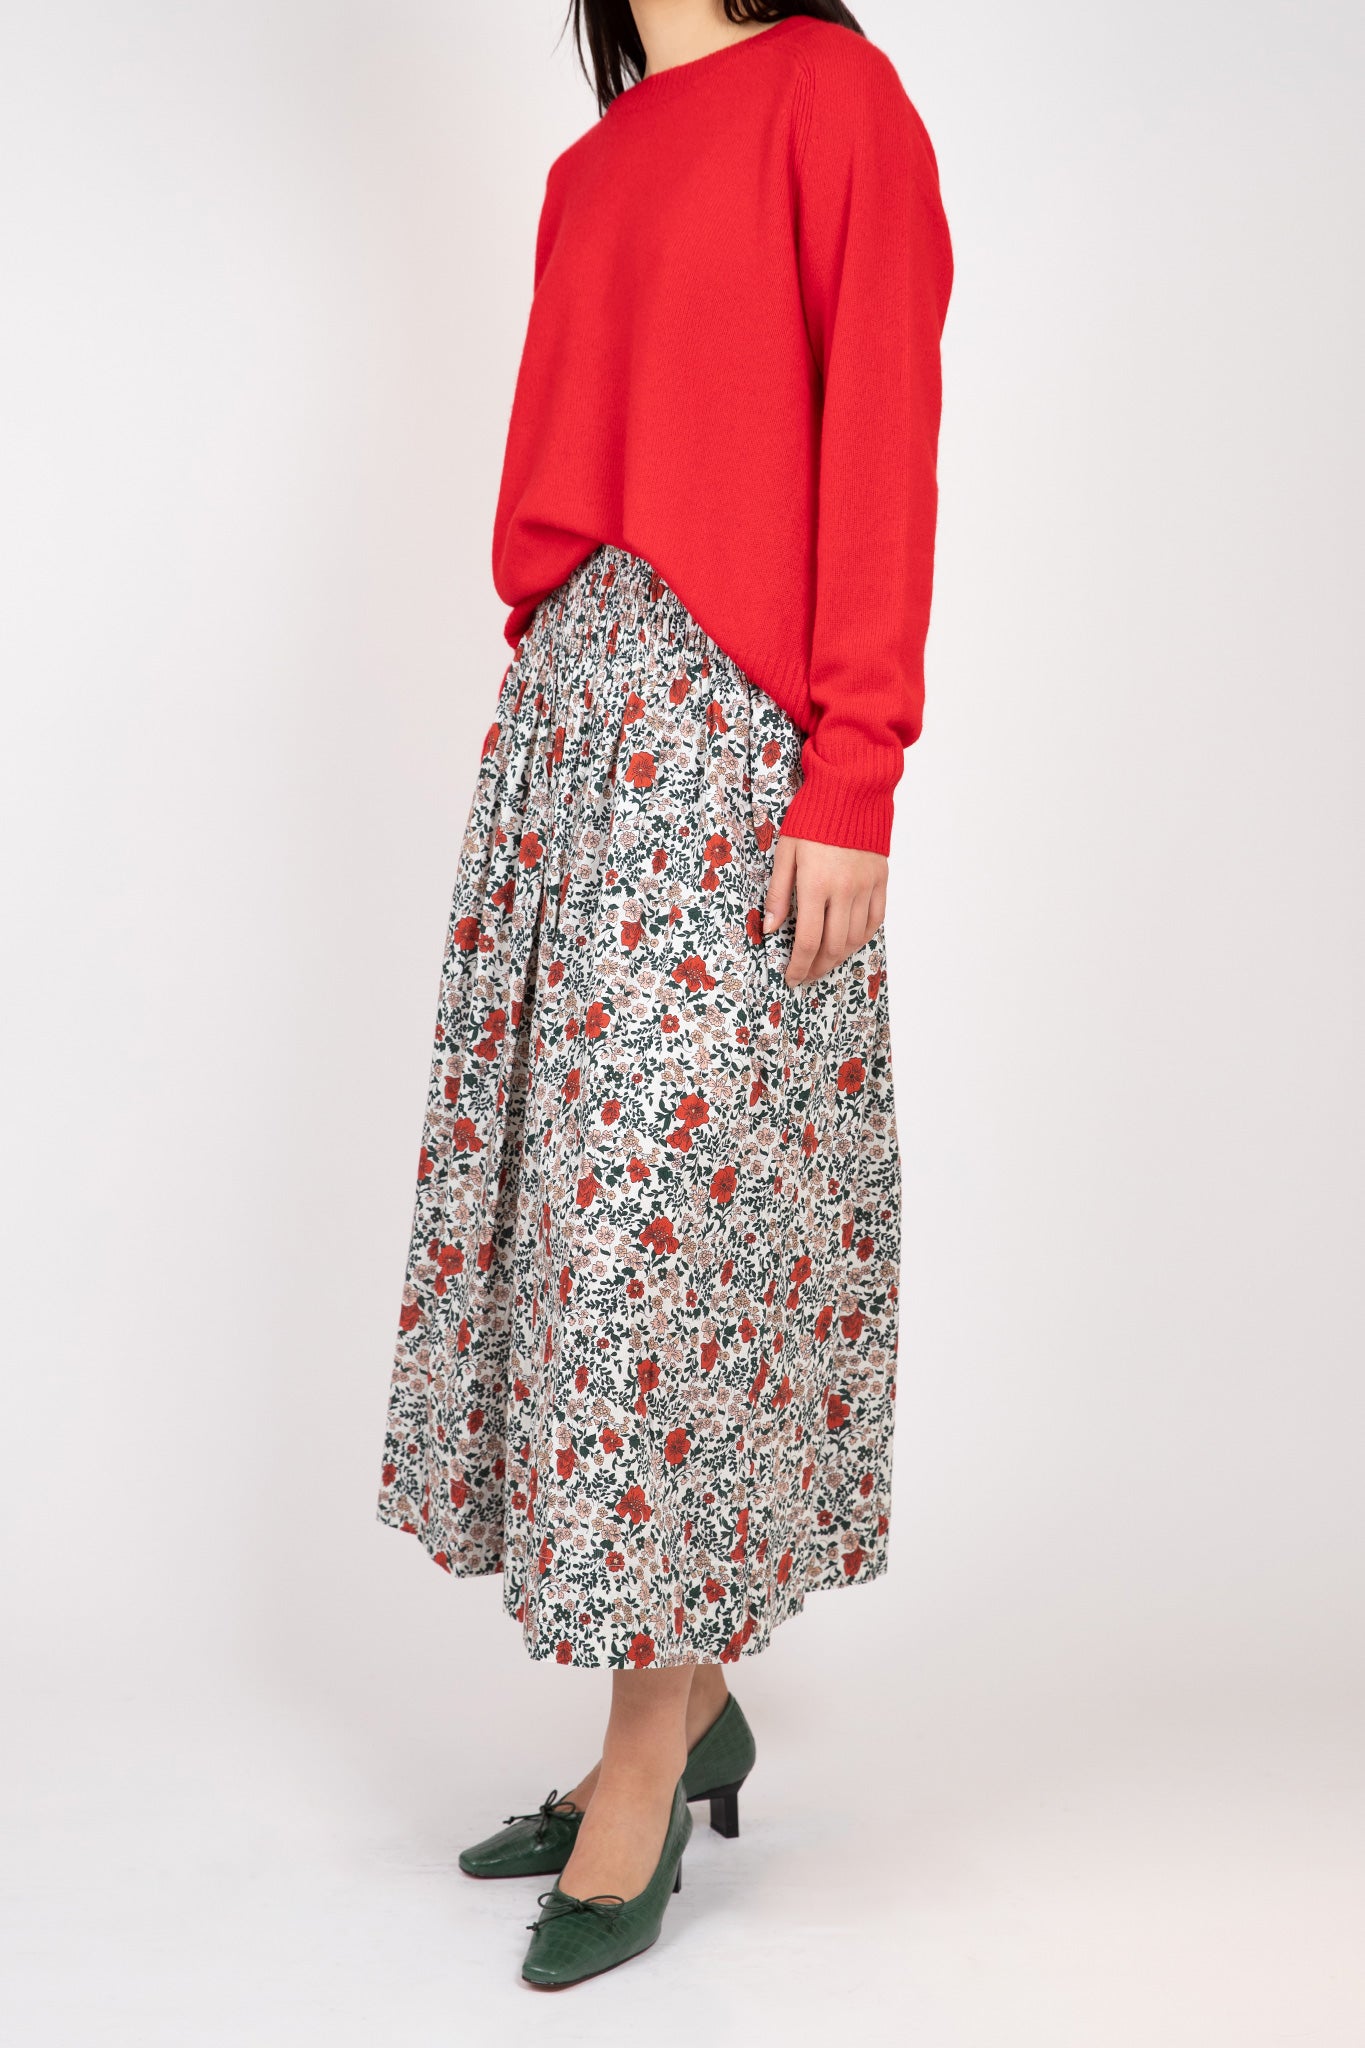    The-Great-The-Viola-Skirt-Cream-Mesa-Floral